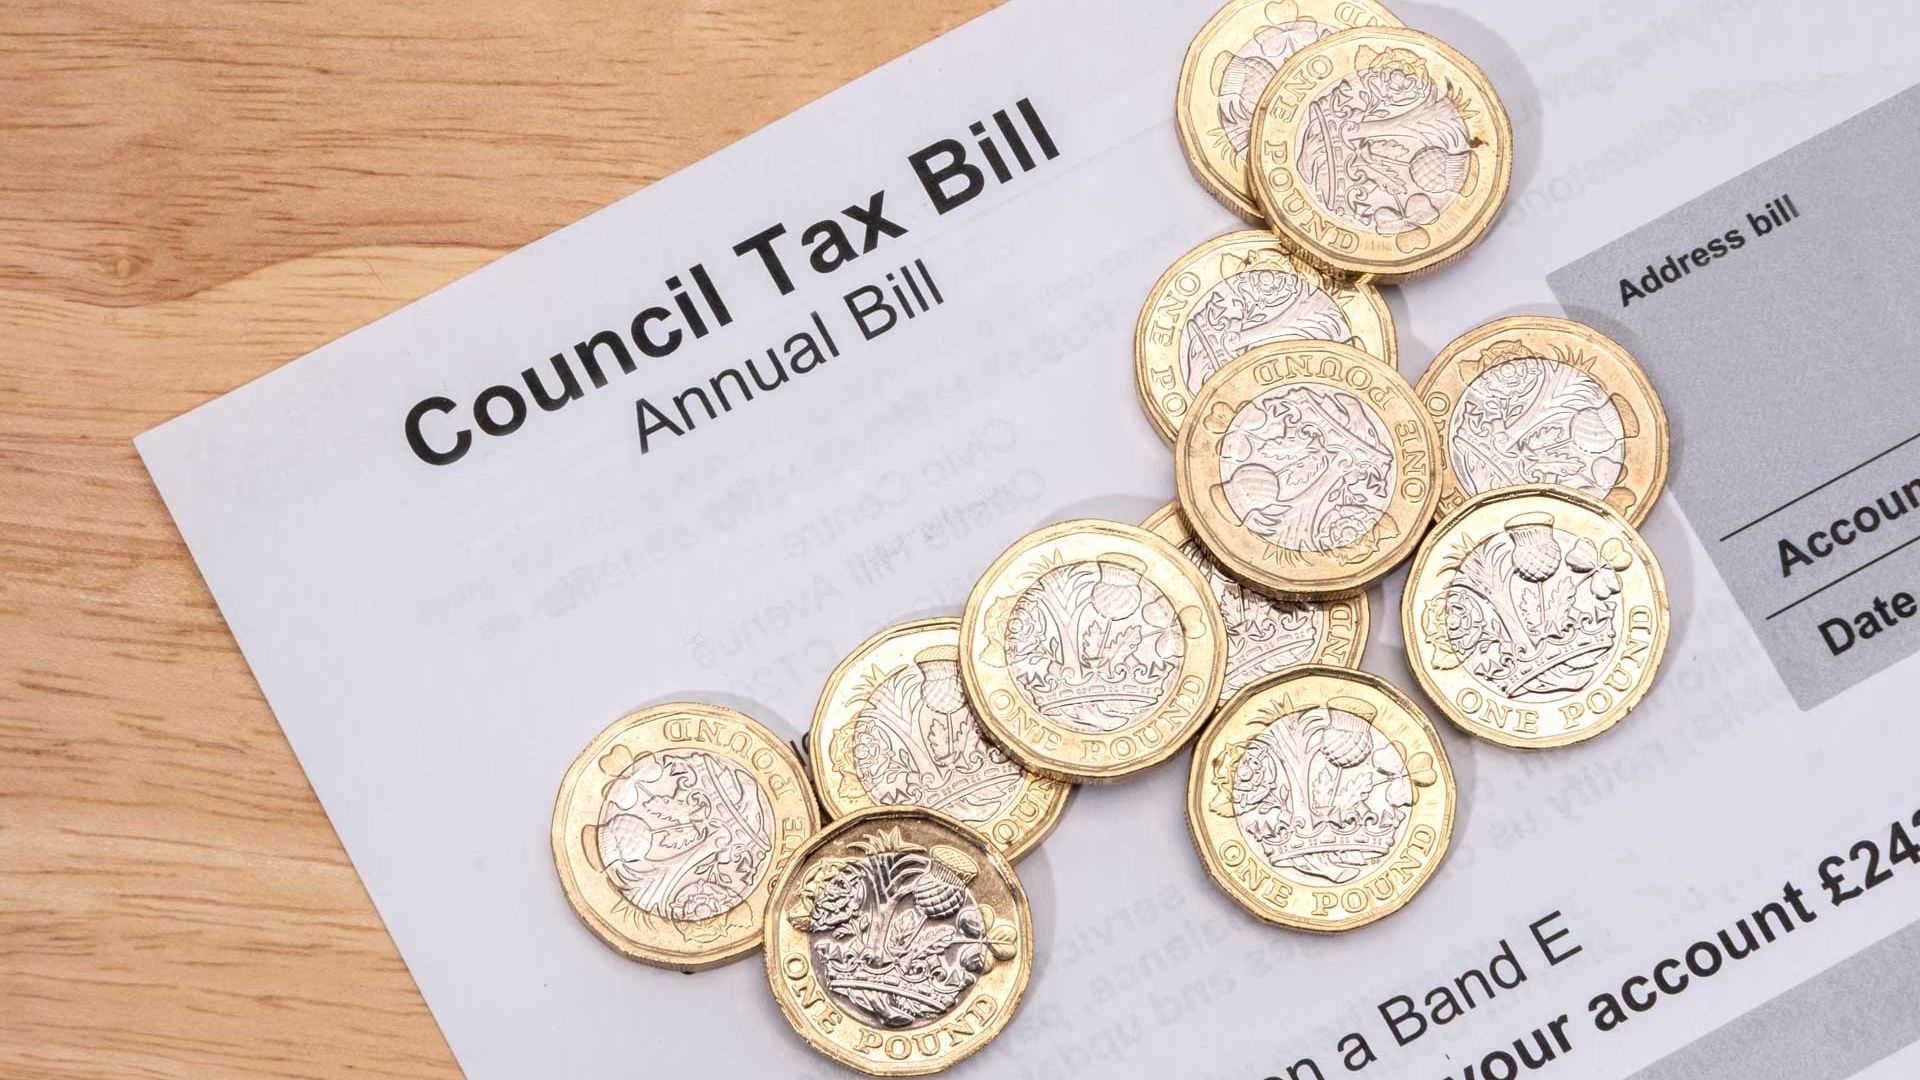 Council tax bill with £1 coins on